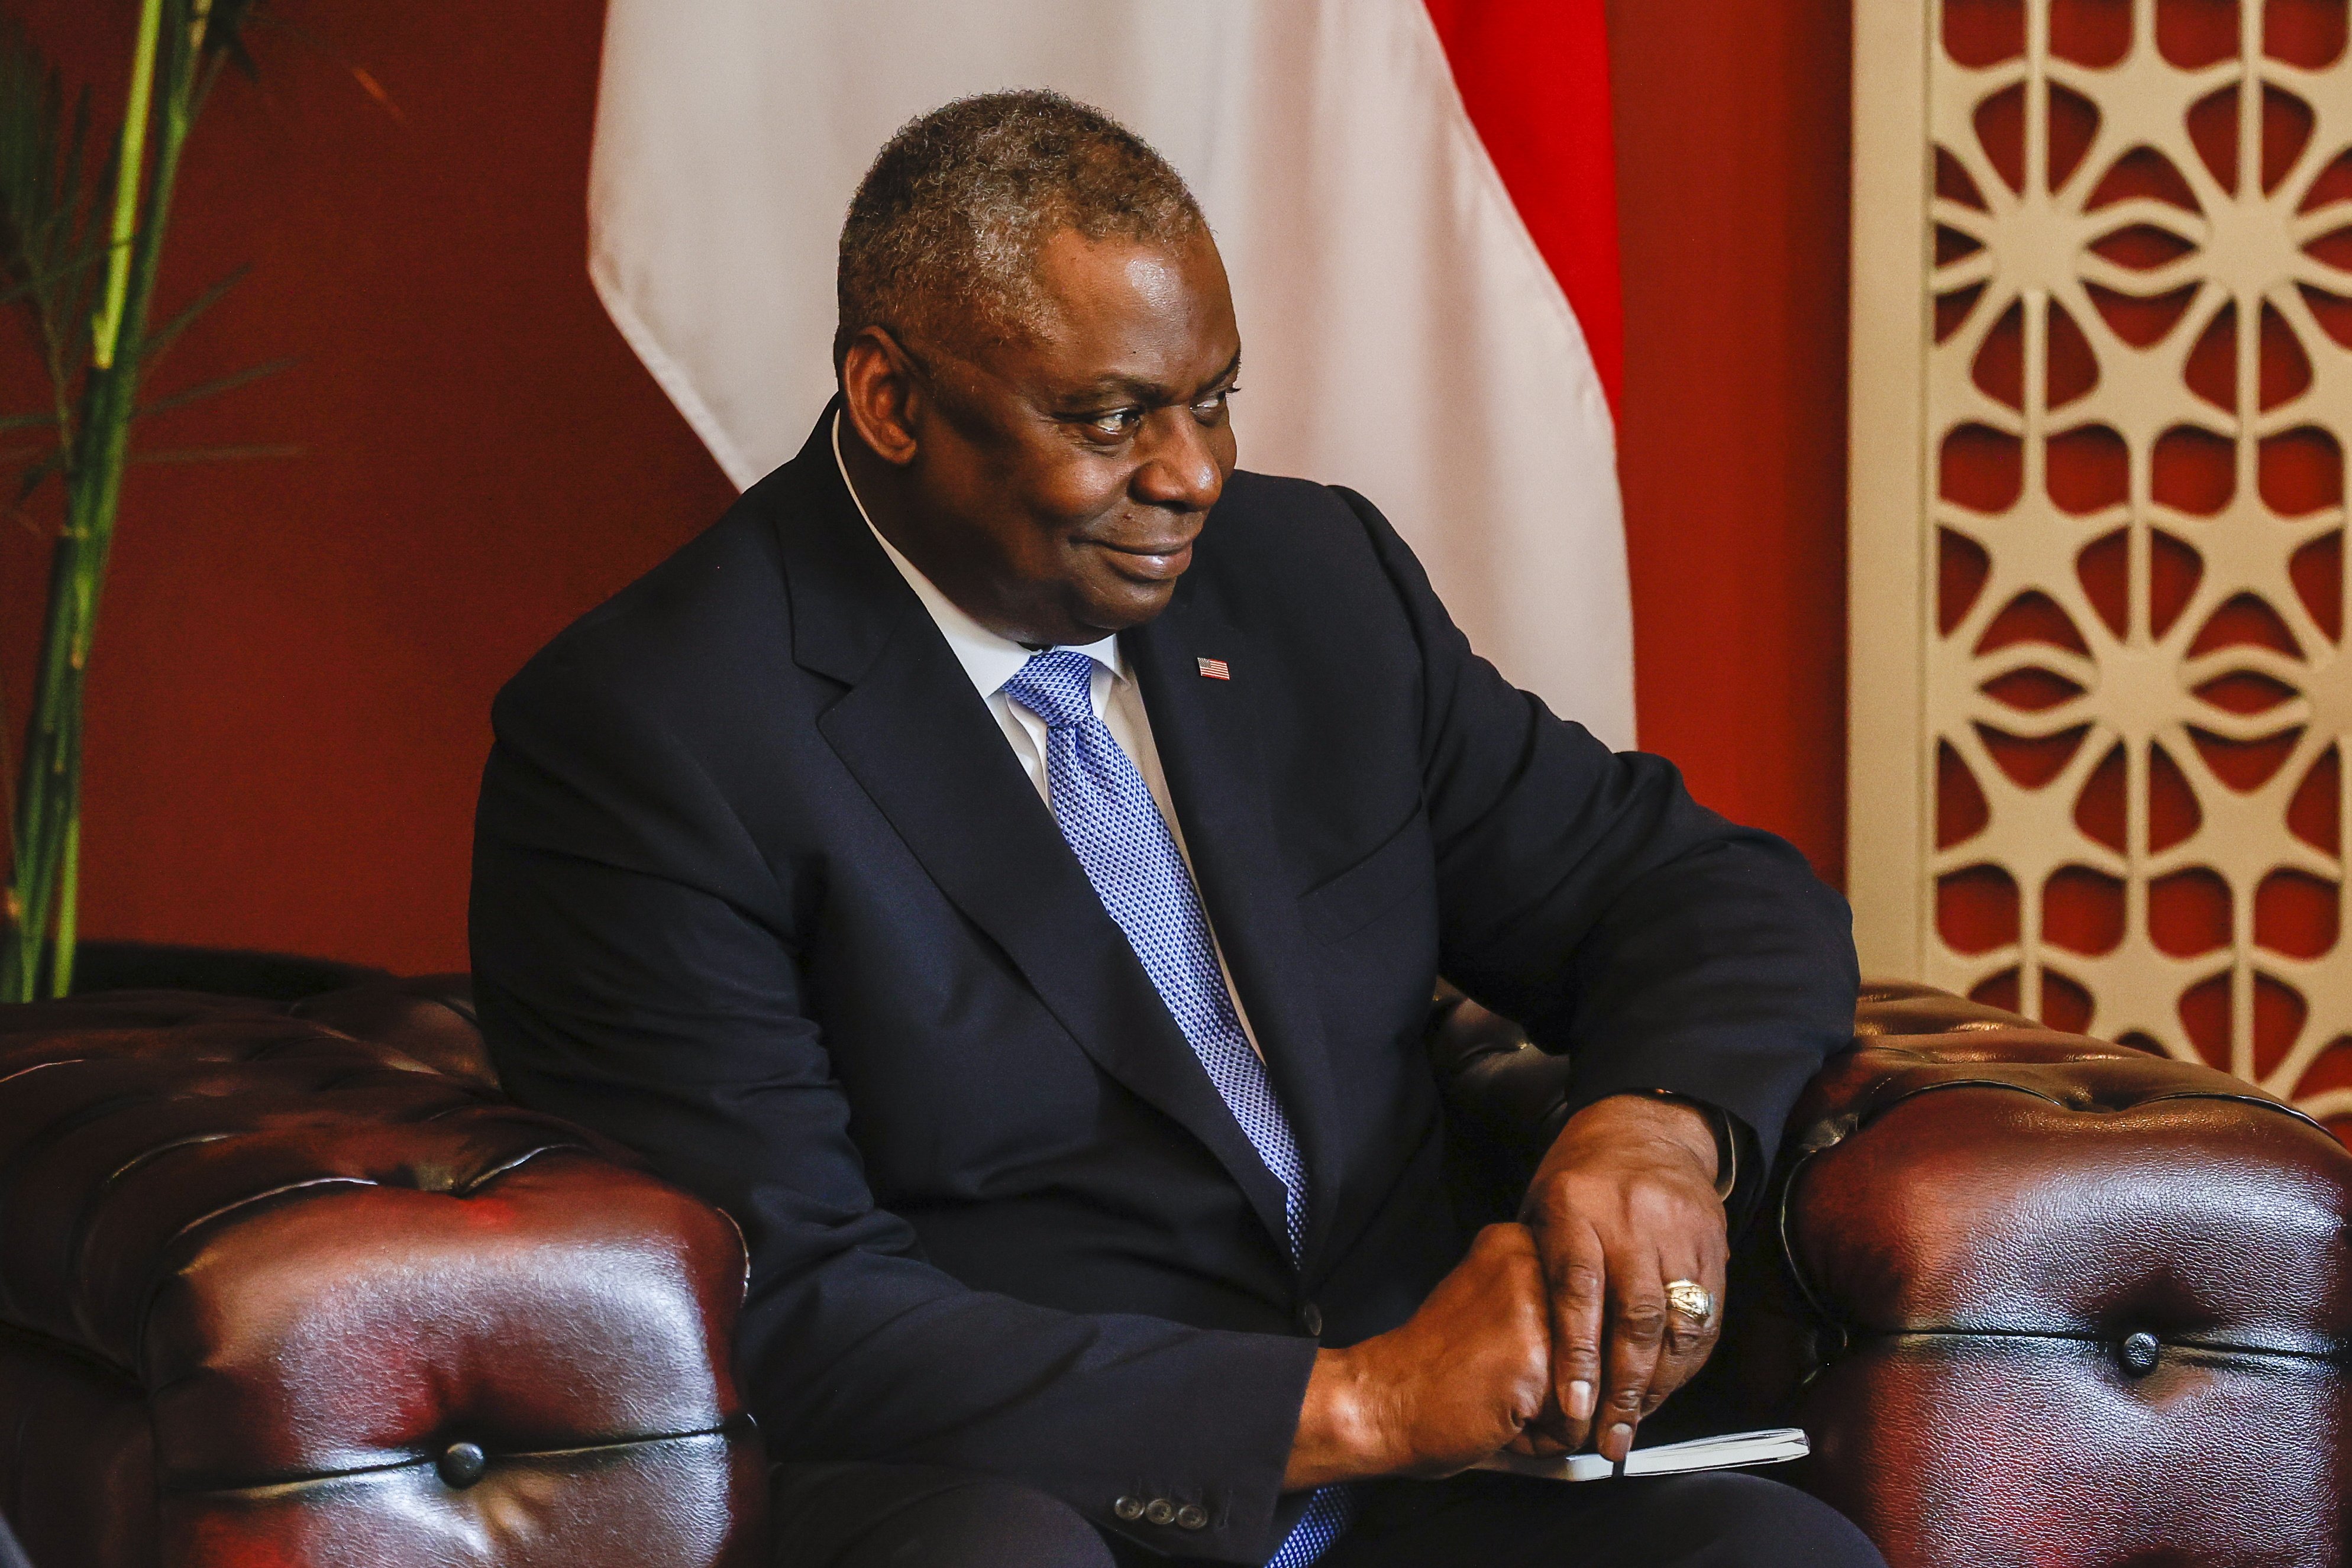 US Defence Secretary Lloyd Austin was in Indonesia for an Asean conference on Thursday. Photo: EPA-EFE